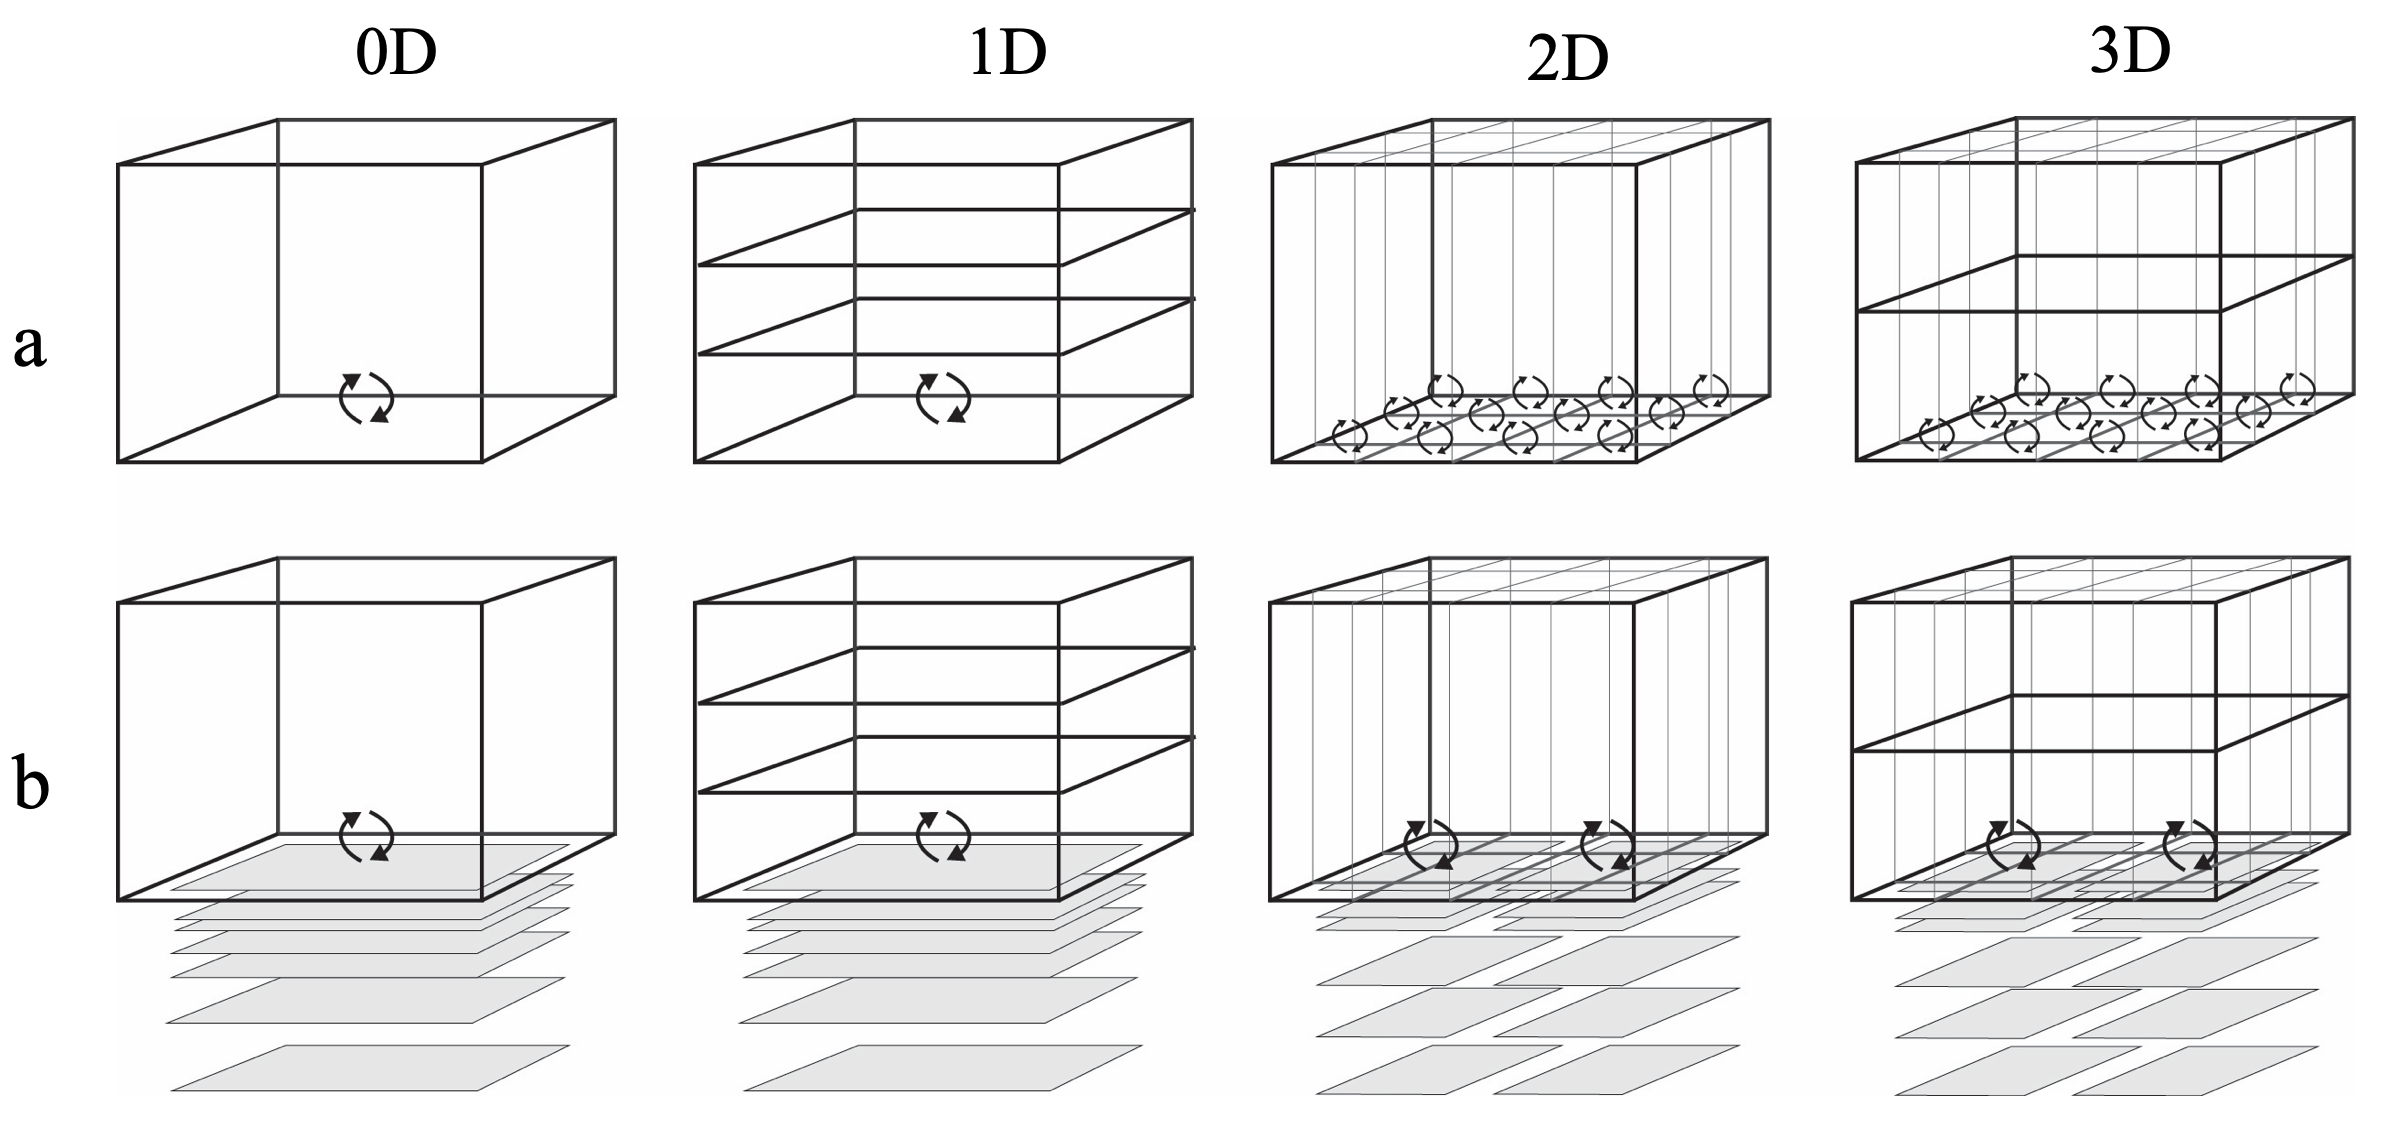 Spatial resolution options available through AED. a) Water column studies have traditionally assigned a flux to the sediment water interface without resolving the sediment chemical concentrations by depth, though they can be resolved laterally. b) The 0D water column is the method used in most sediment diagenesis studies, and use of multiple sediment zones is an option available within AED.